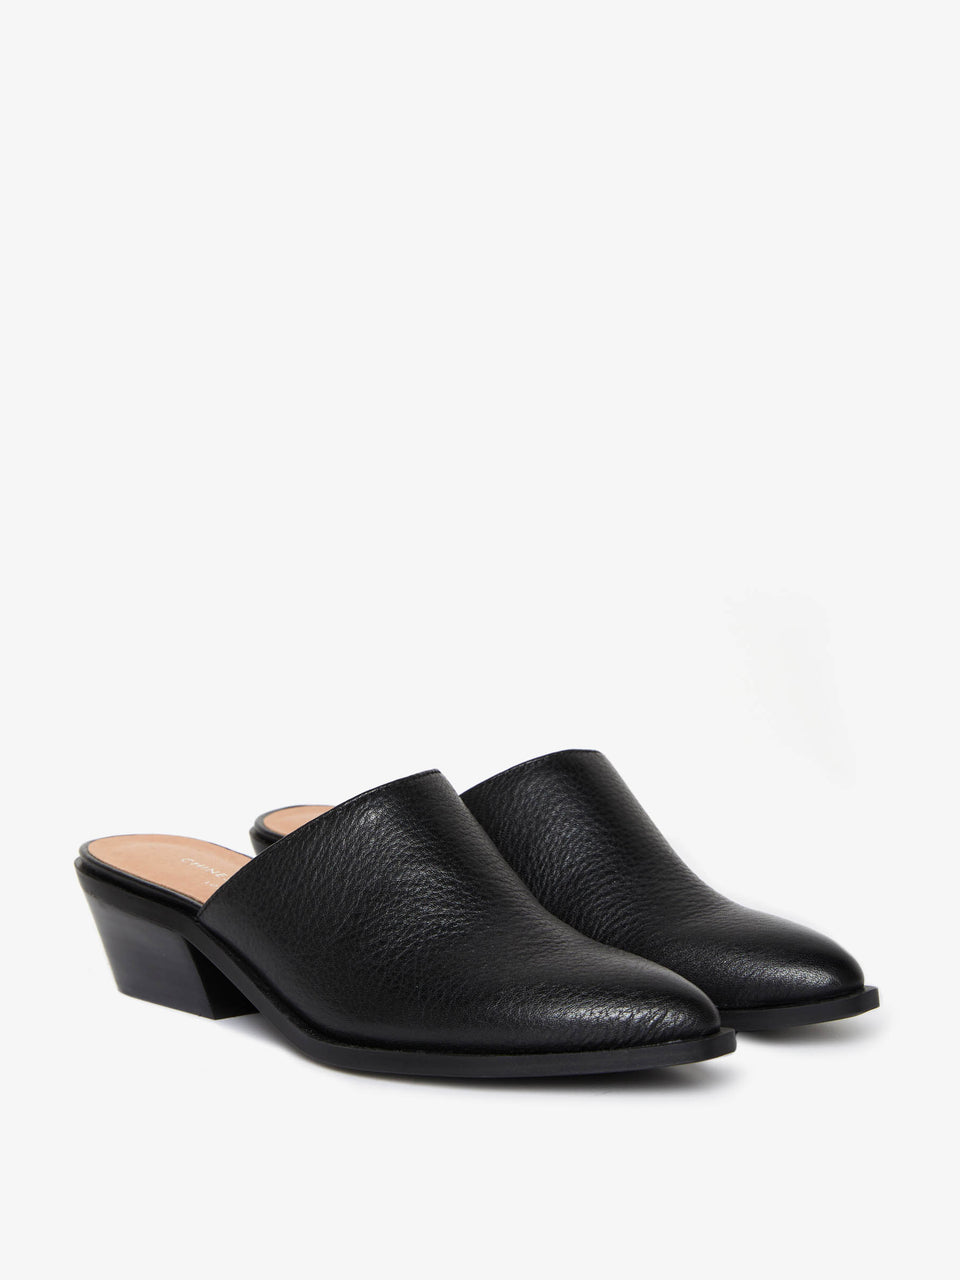 Chinese_Laundry_Millie_Leather_Mule_Black